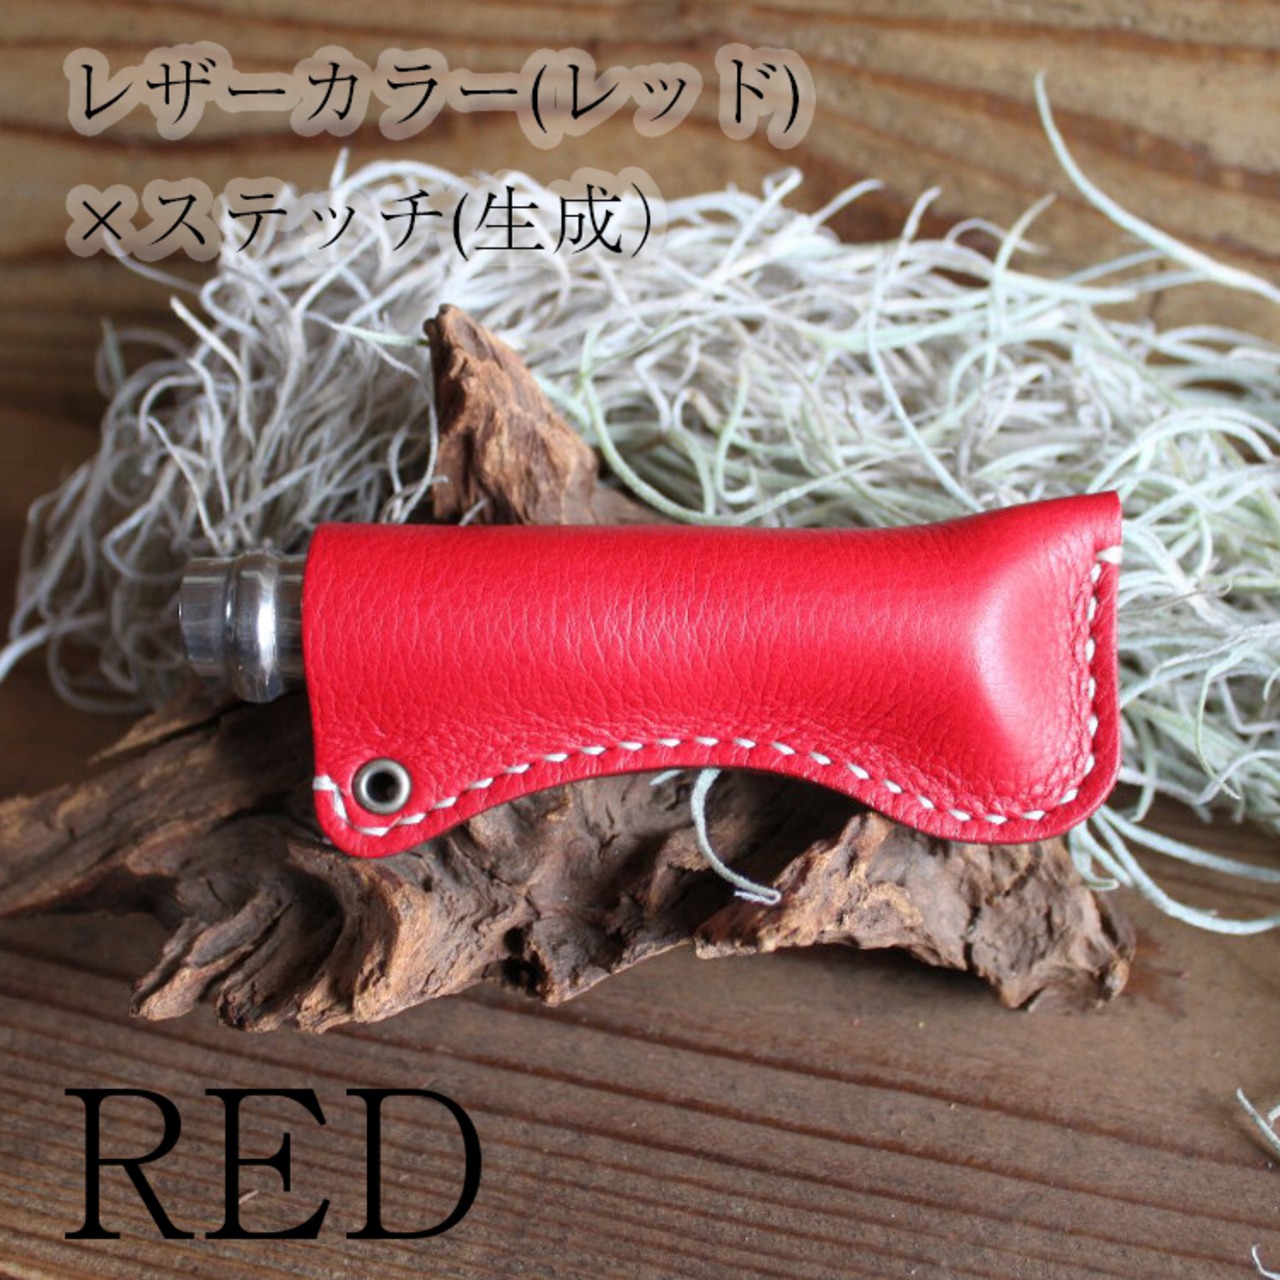 What will be will be & Greenfield オピネル OPINEL フォールディングナイフ No.8 用 レザー ケース